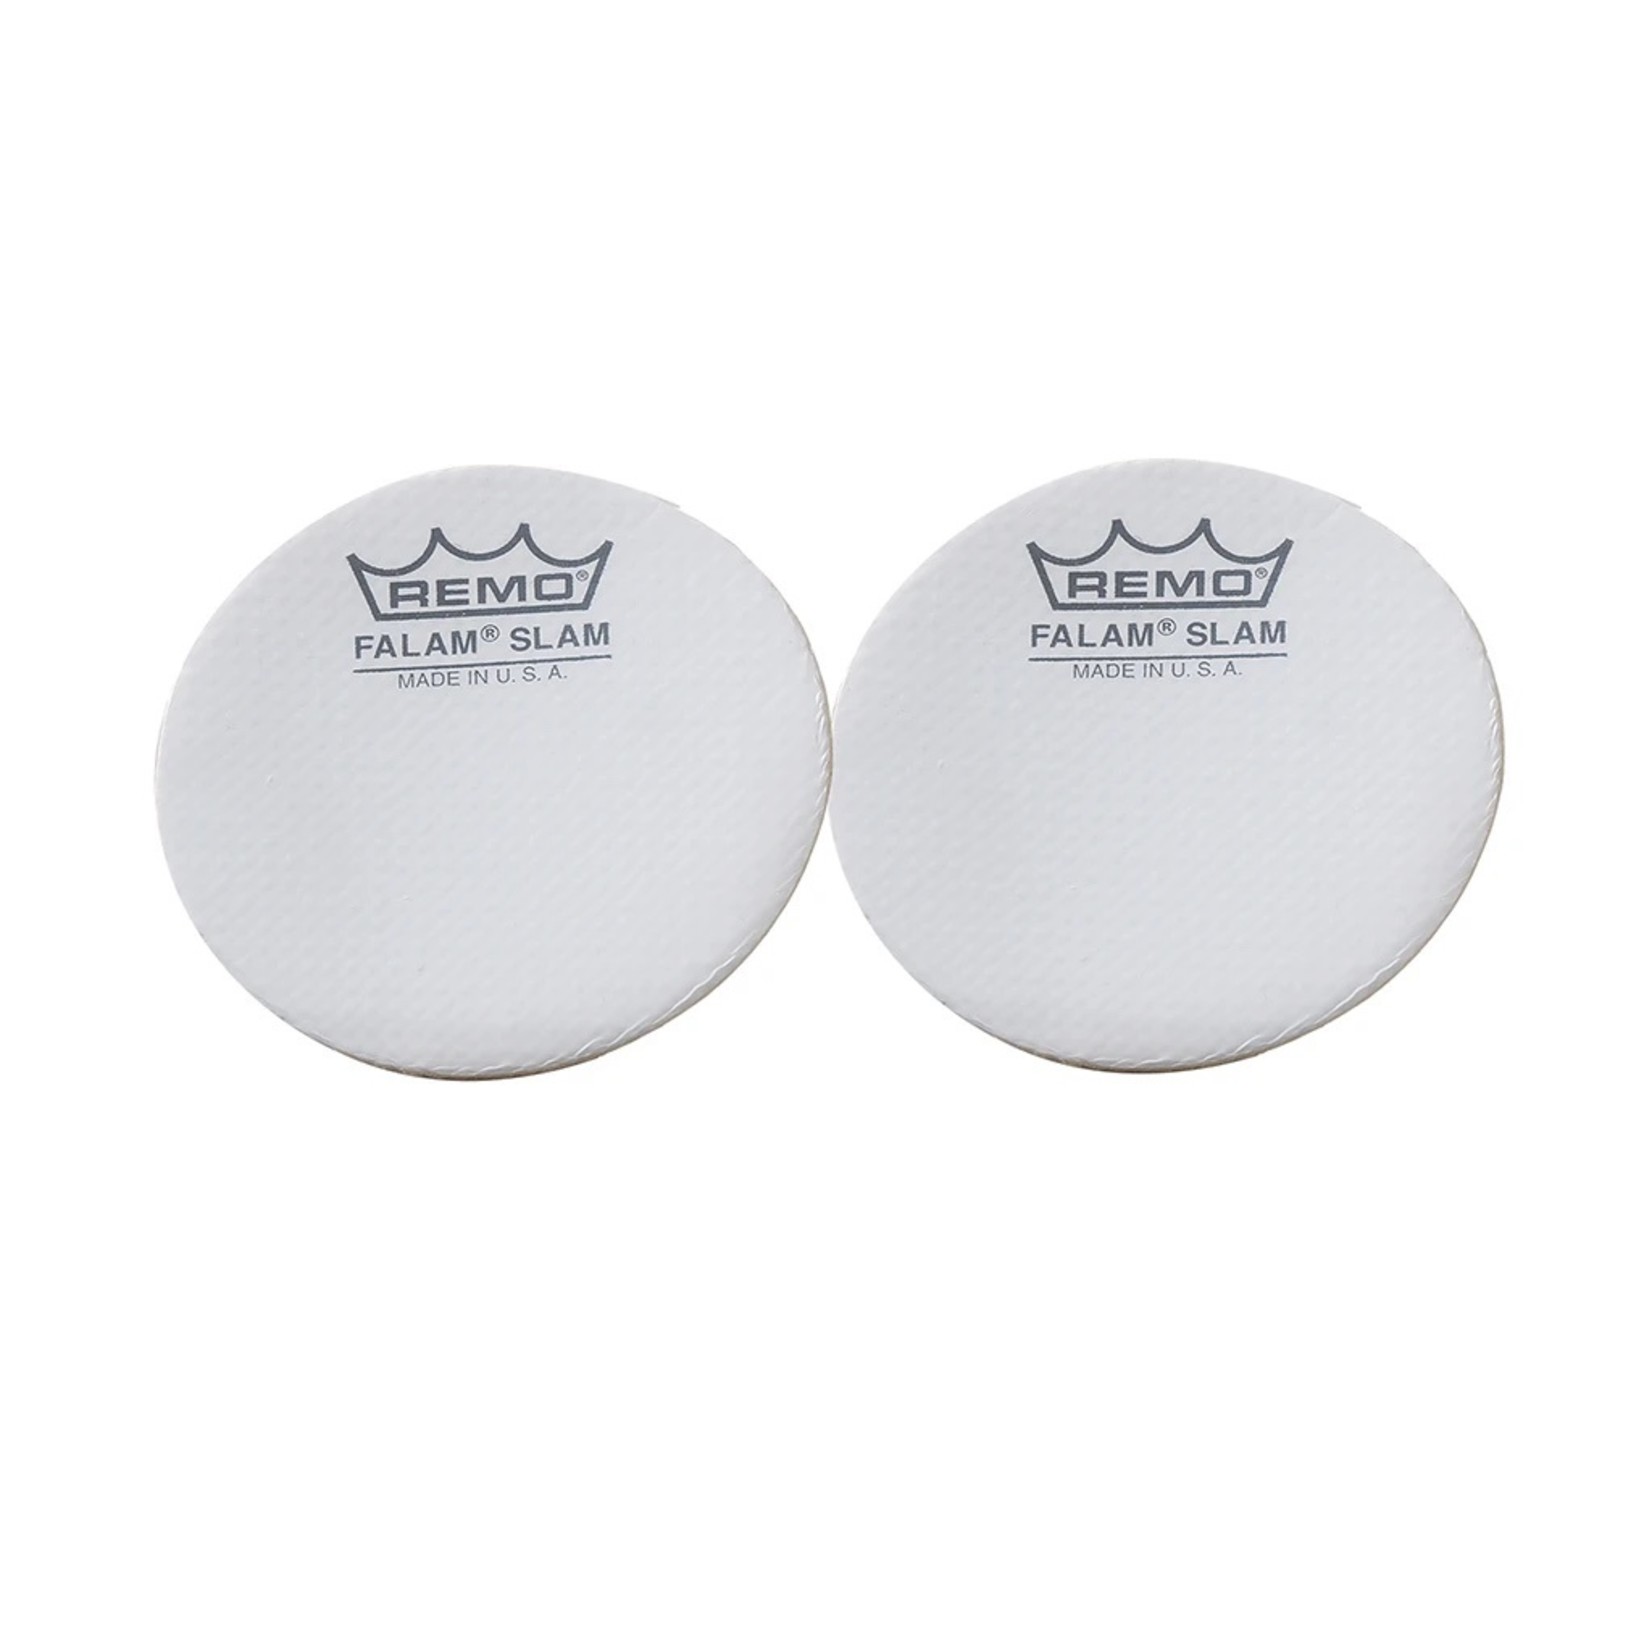 Remo Patch FALAM 2.5" 2 Piece Pack